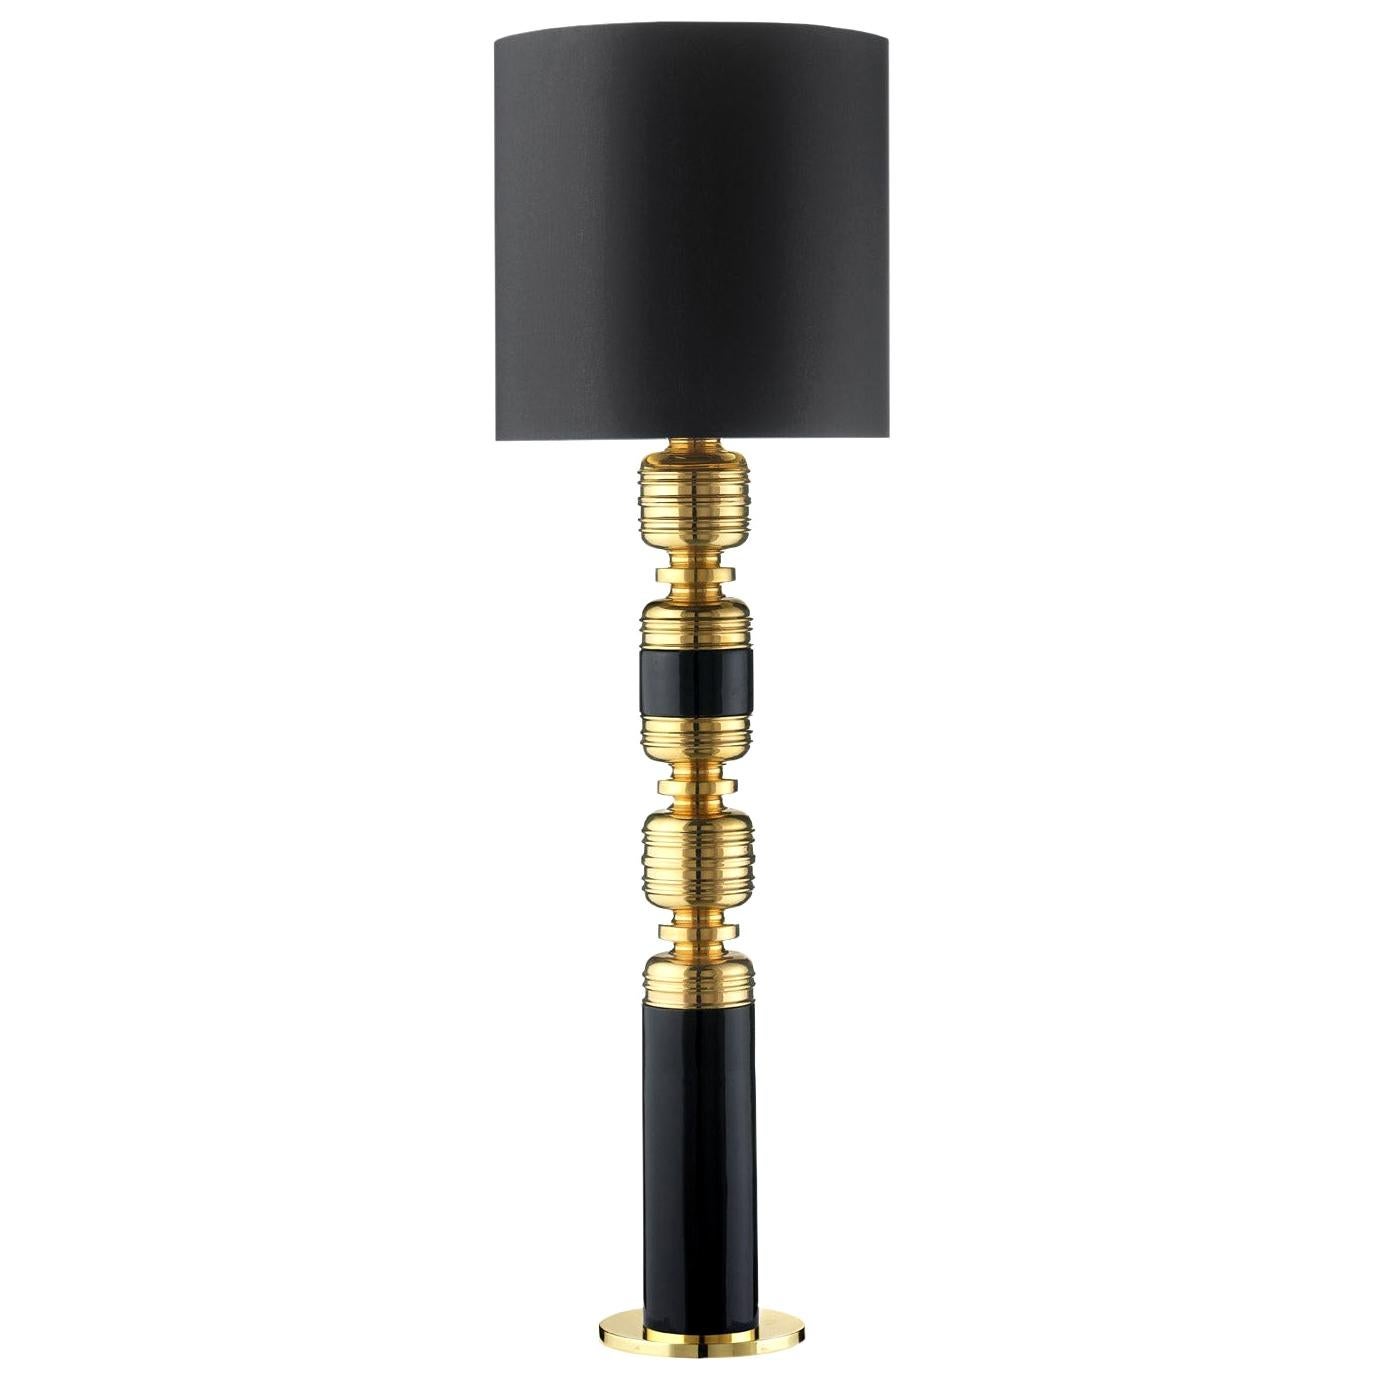 Ceramic Lamp "THEA 5" Handcrafted in 24-Karat Gold and Black by Gabriella B. For Sale